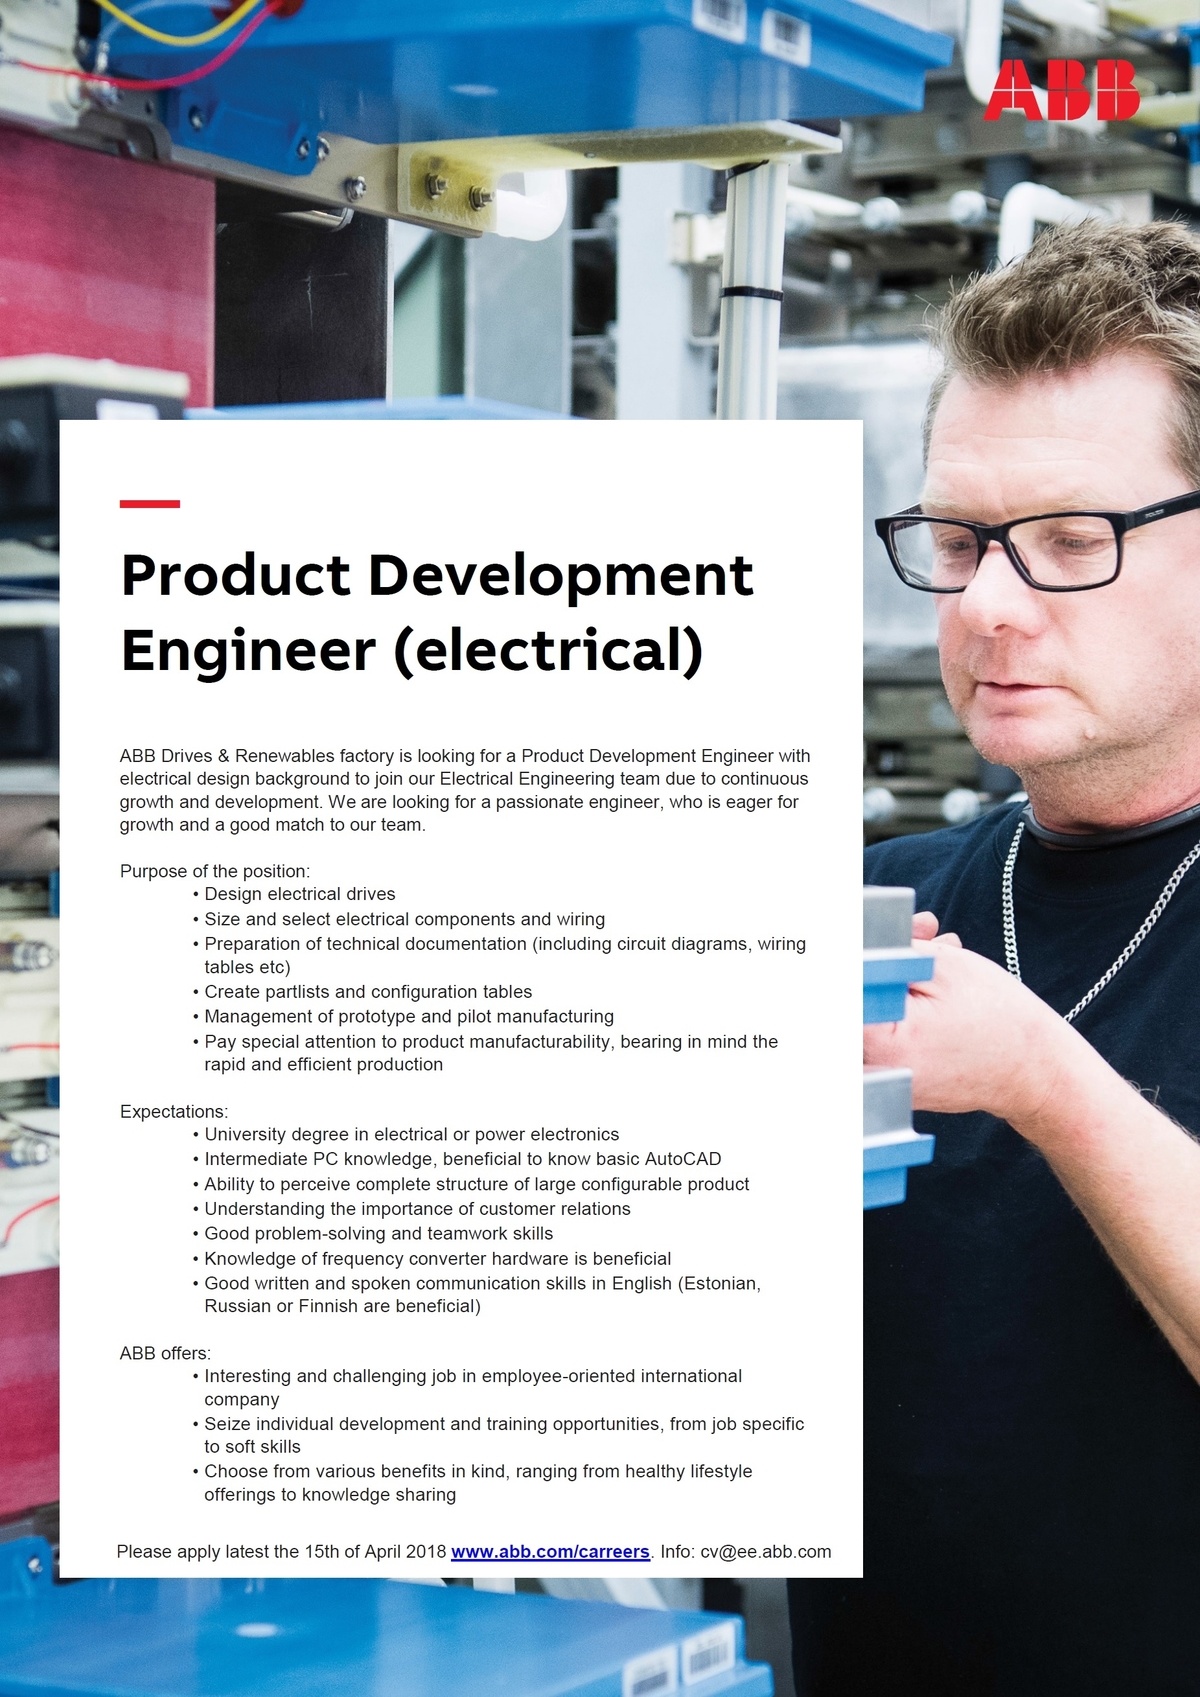 ABB AS Product Development Engineer (electrical)